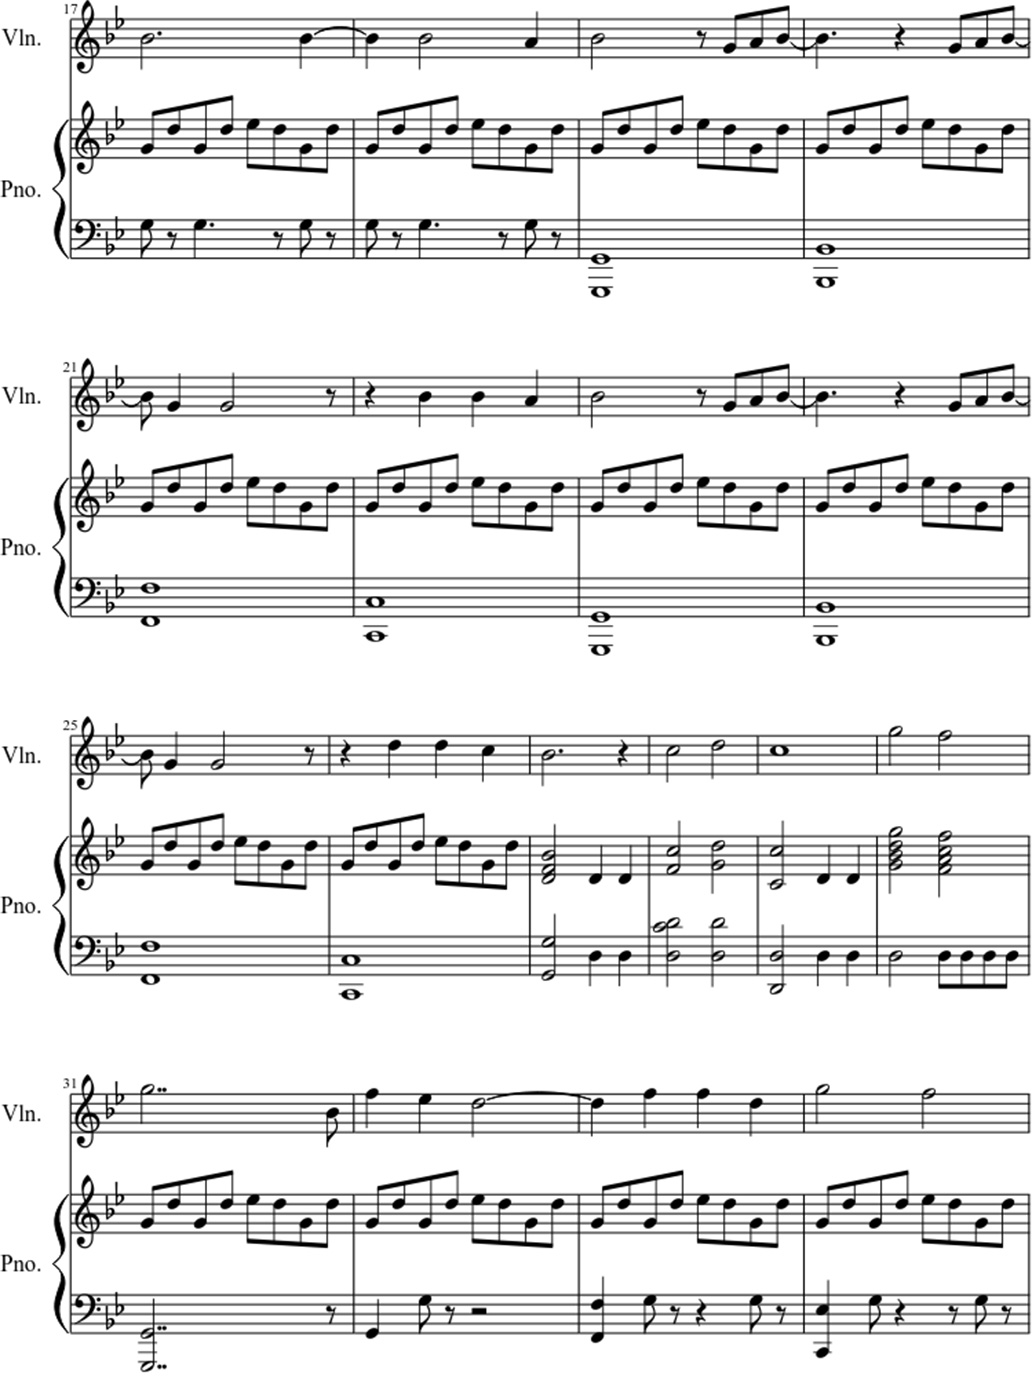 What I've done sheet music notes 2